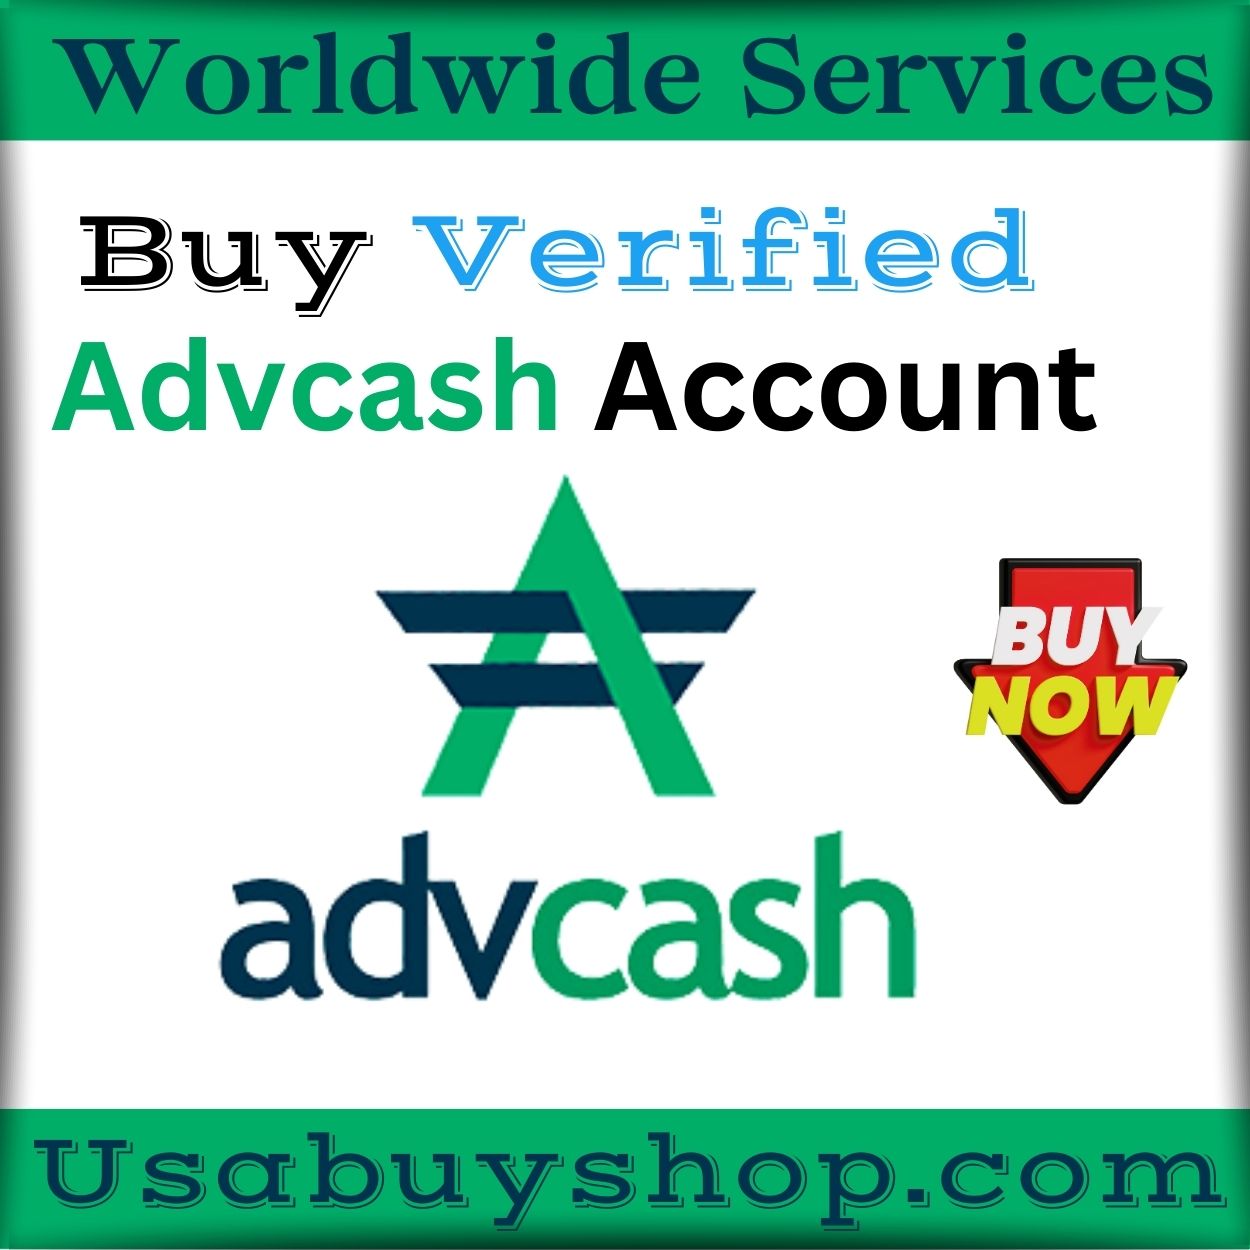 Buy Verified Advcash Accounts - 100% USA,UK Trusted Sellers